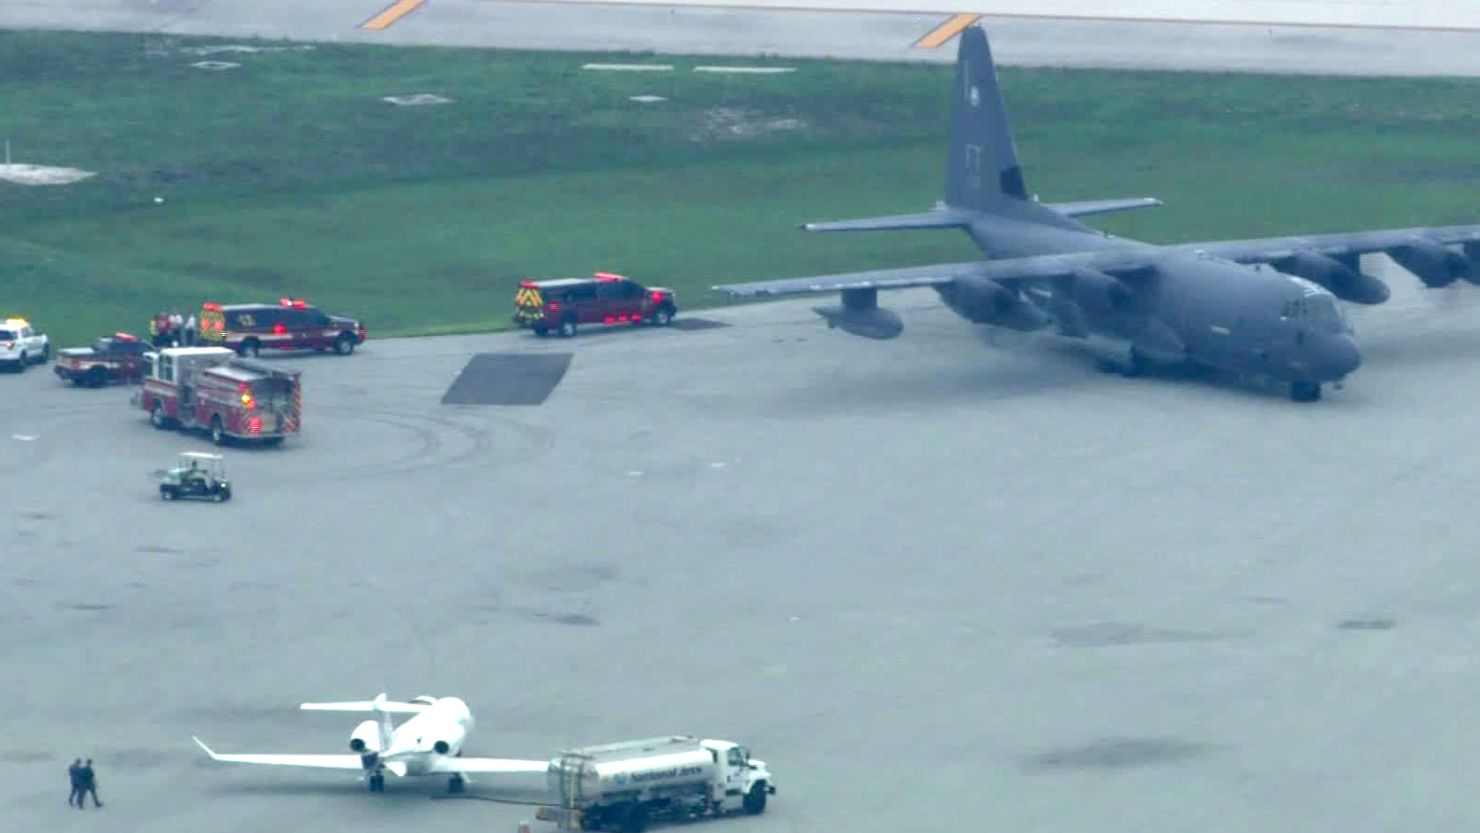 A  US military C-130 transported injured people from the Bahamas to Fort Lauderdale